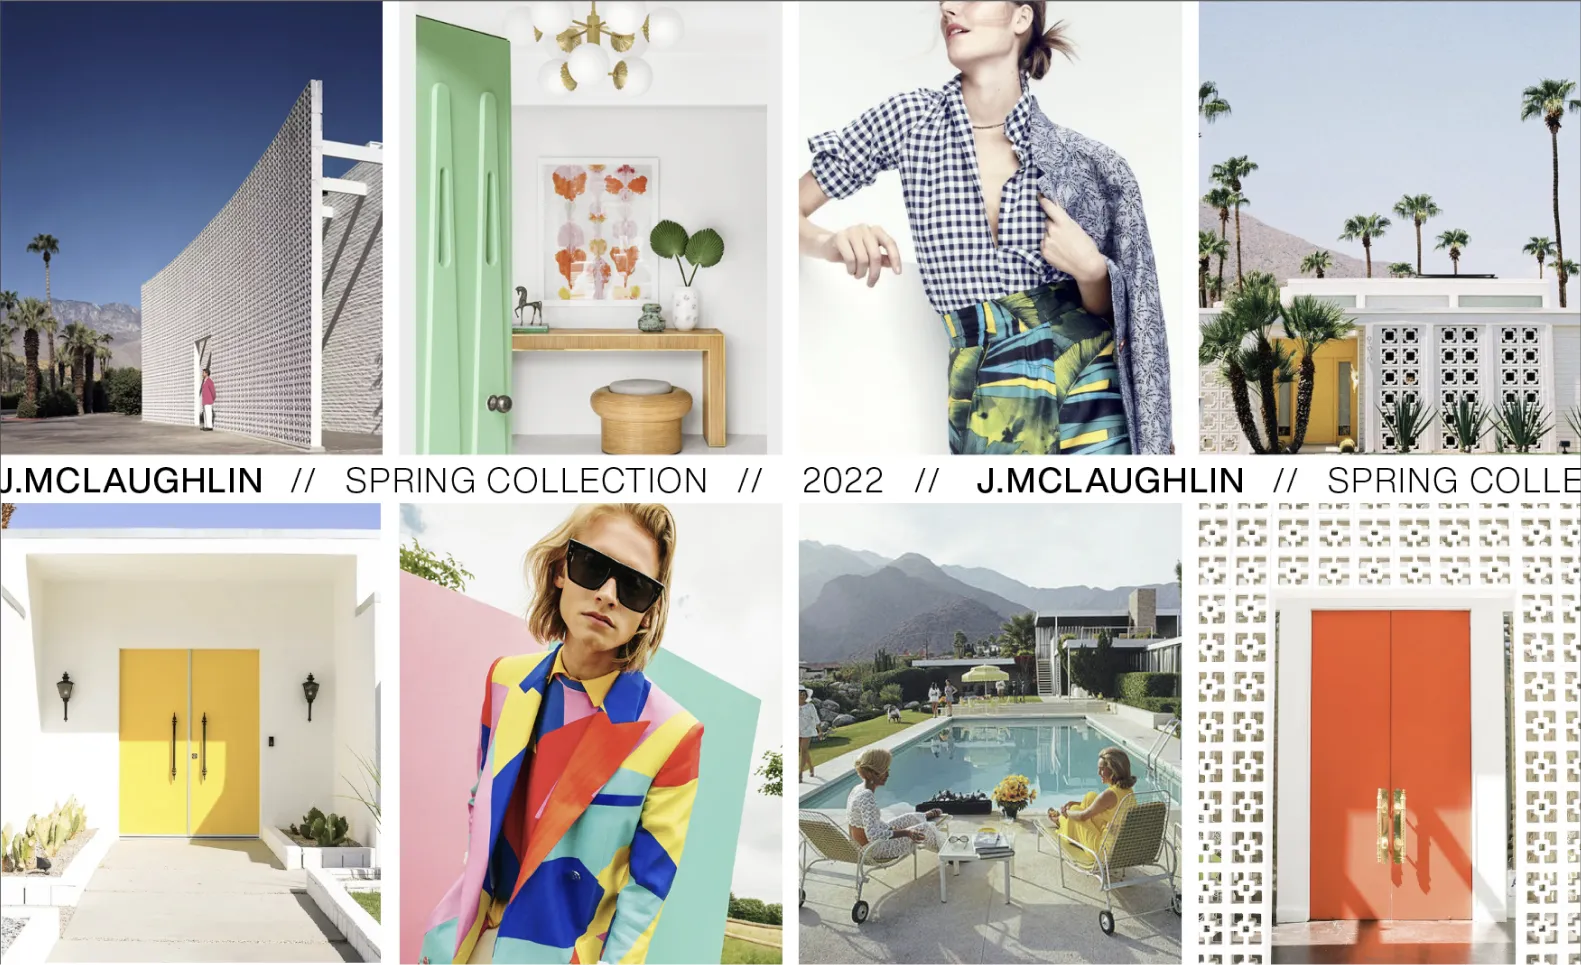 Collage of inspiration for a shoot with J. McLaughlin